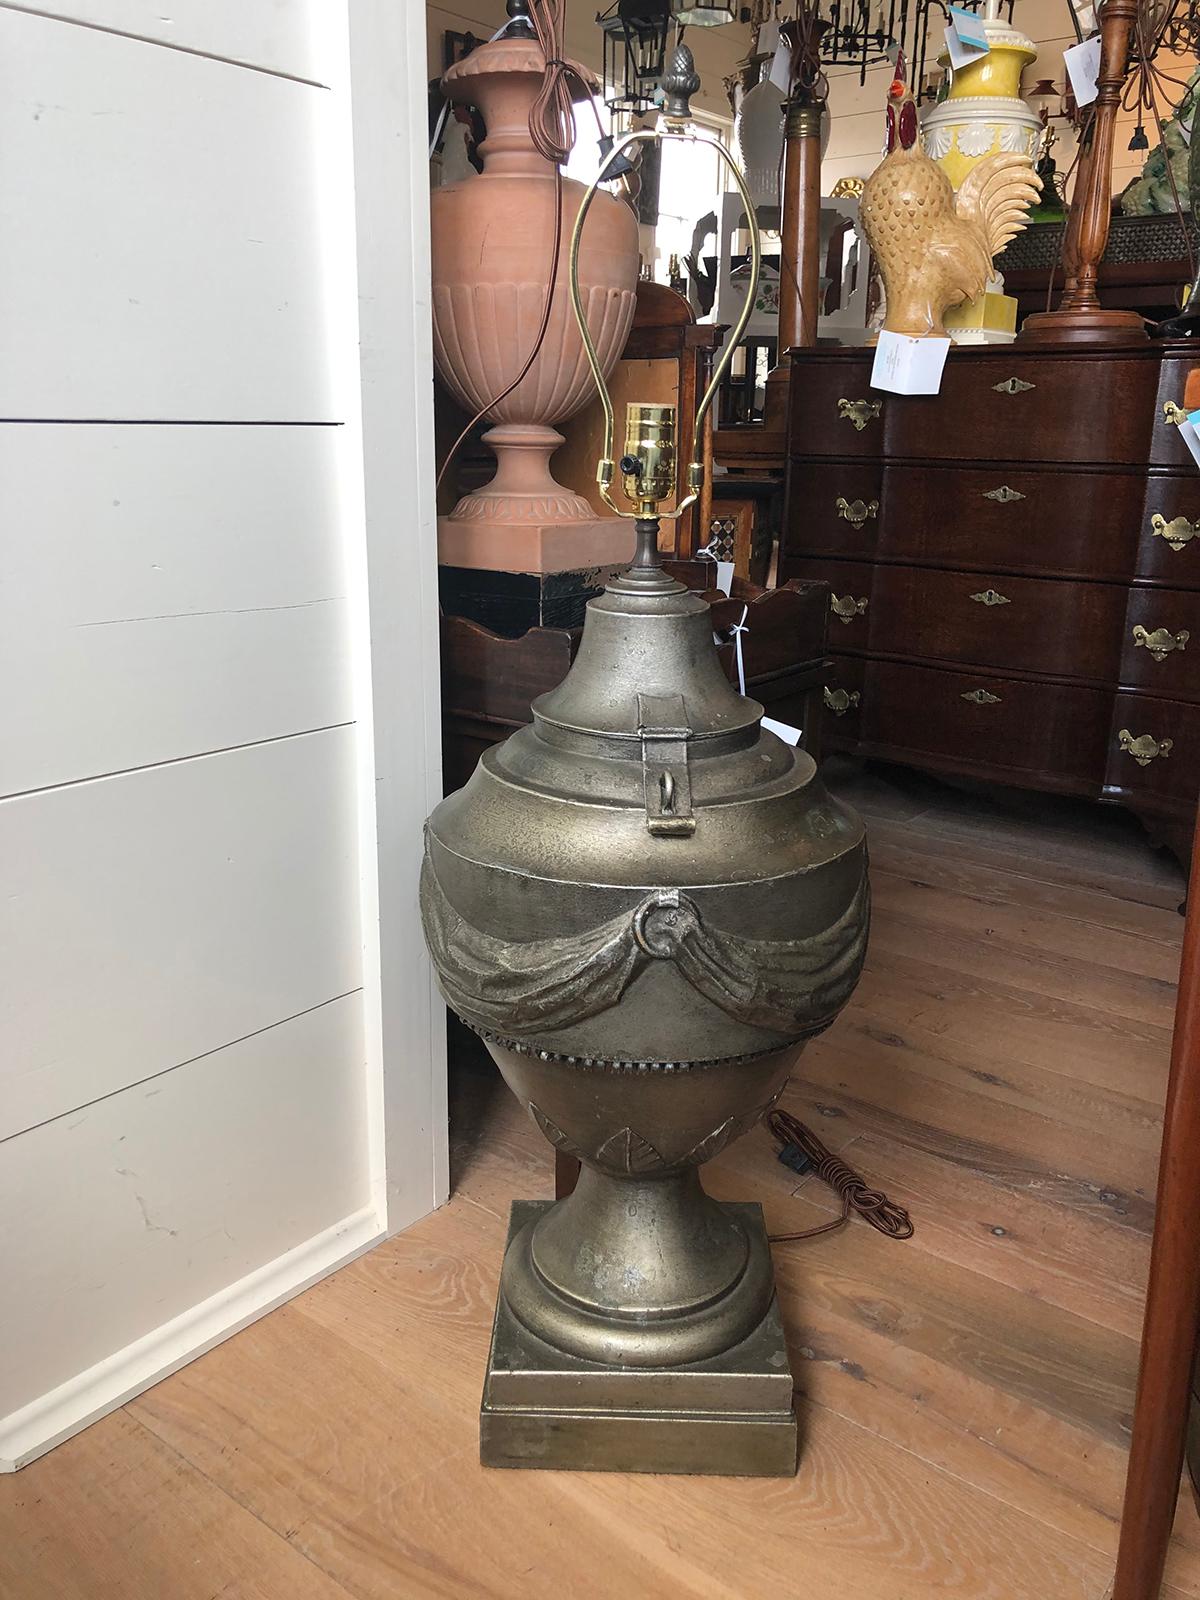 20th century neoclassical Italian patinated tole urn as lamp
New wiring.